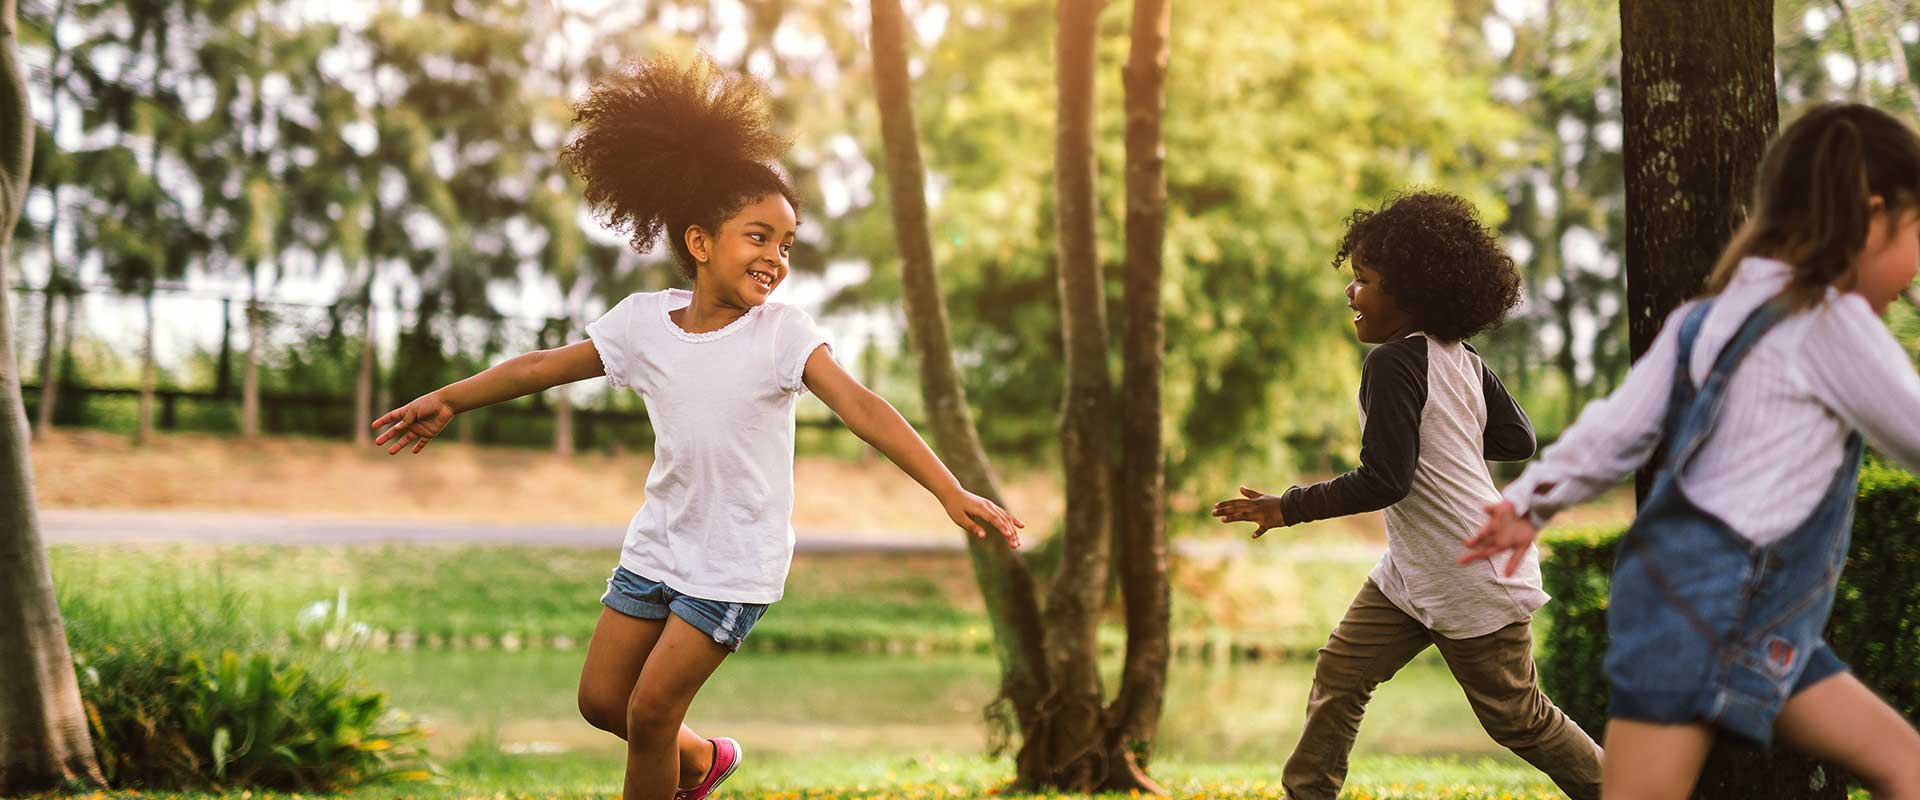 Be active! Children runnin around outdoors being active and having fun. Click on the button to learn more.